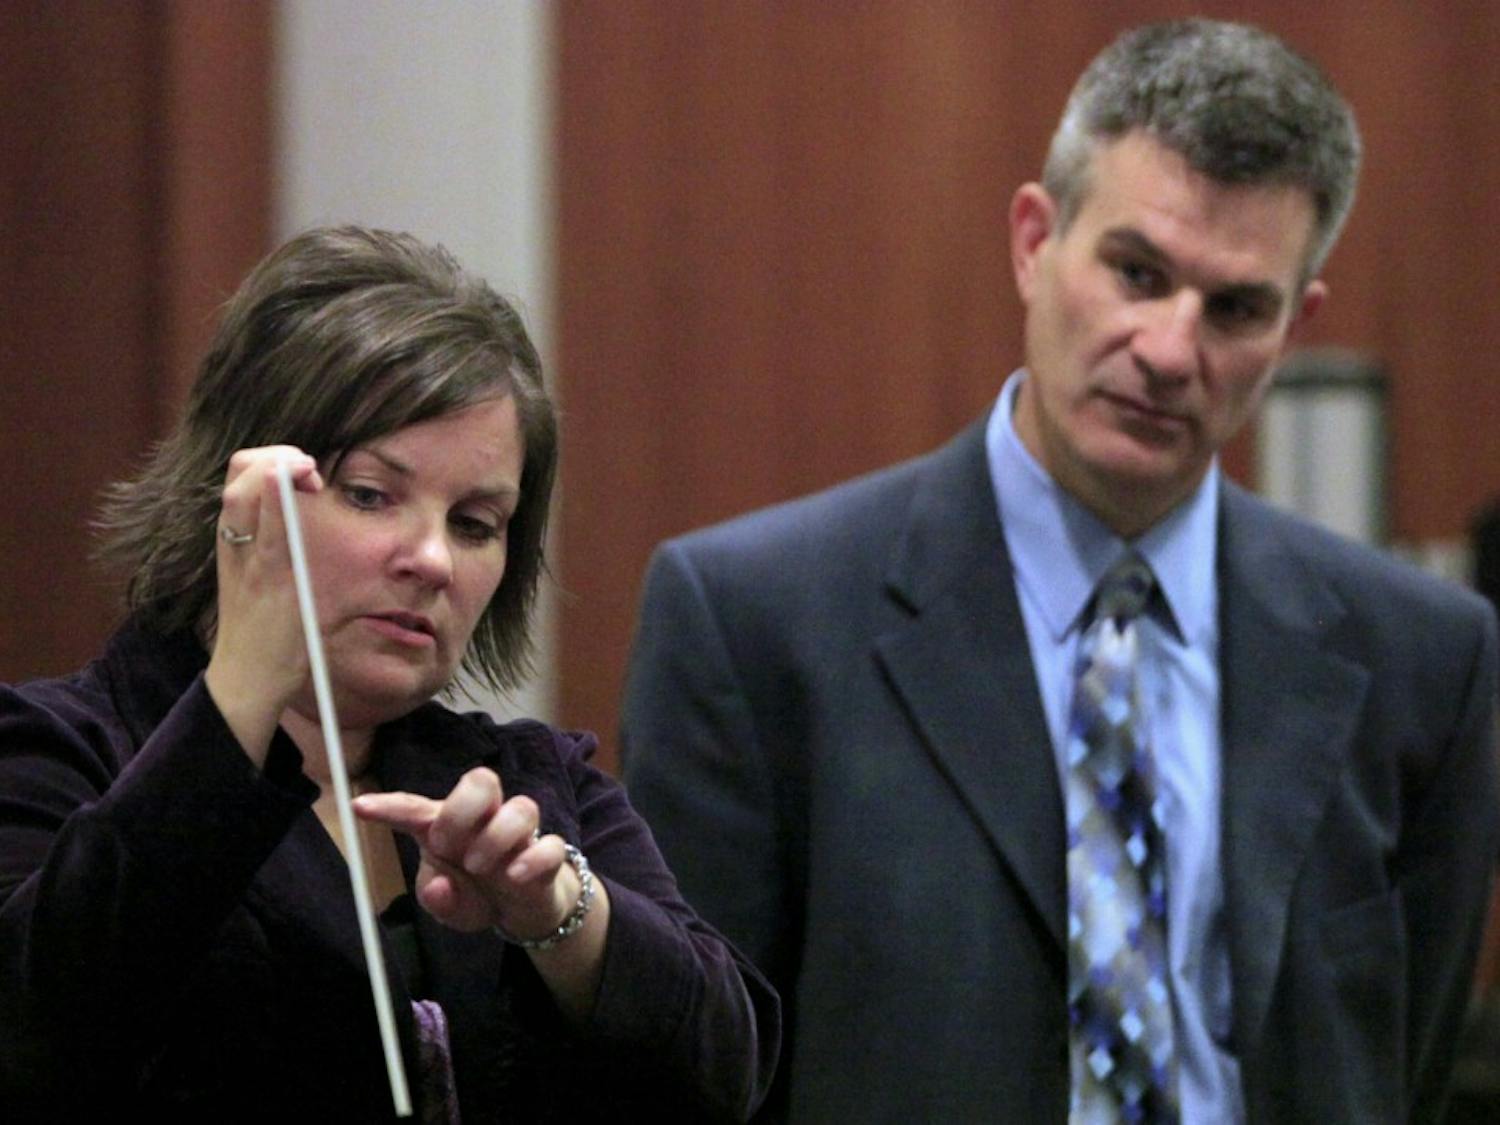 Celisa Lehew with Chapel Hill Police shows the jurors a photograph of the house Eve Carson lived. Next to her is Orange County DA James Woodall, Jr. The trial of Laurence Alvin Lovette Jr., the second man who is charged in the death of UNC-Chapel Hill Student Body President Eve Carson in March 2008, continued at Orange County Courthouse Monday, Dec. 12, 2011. 